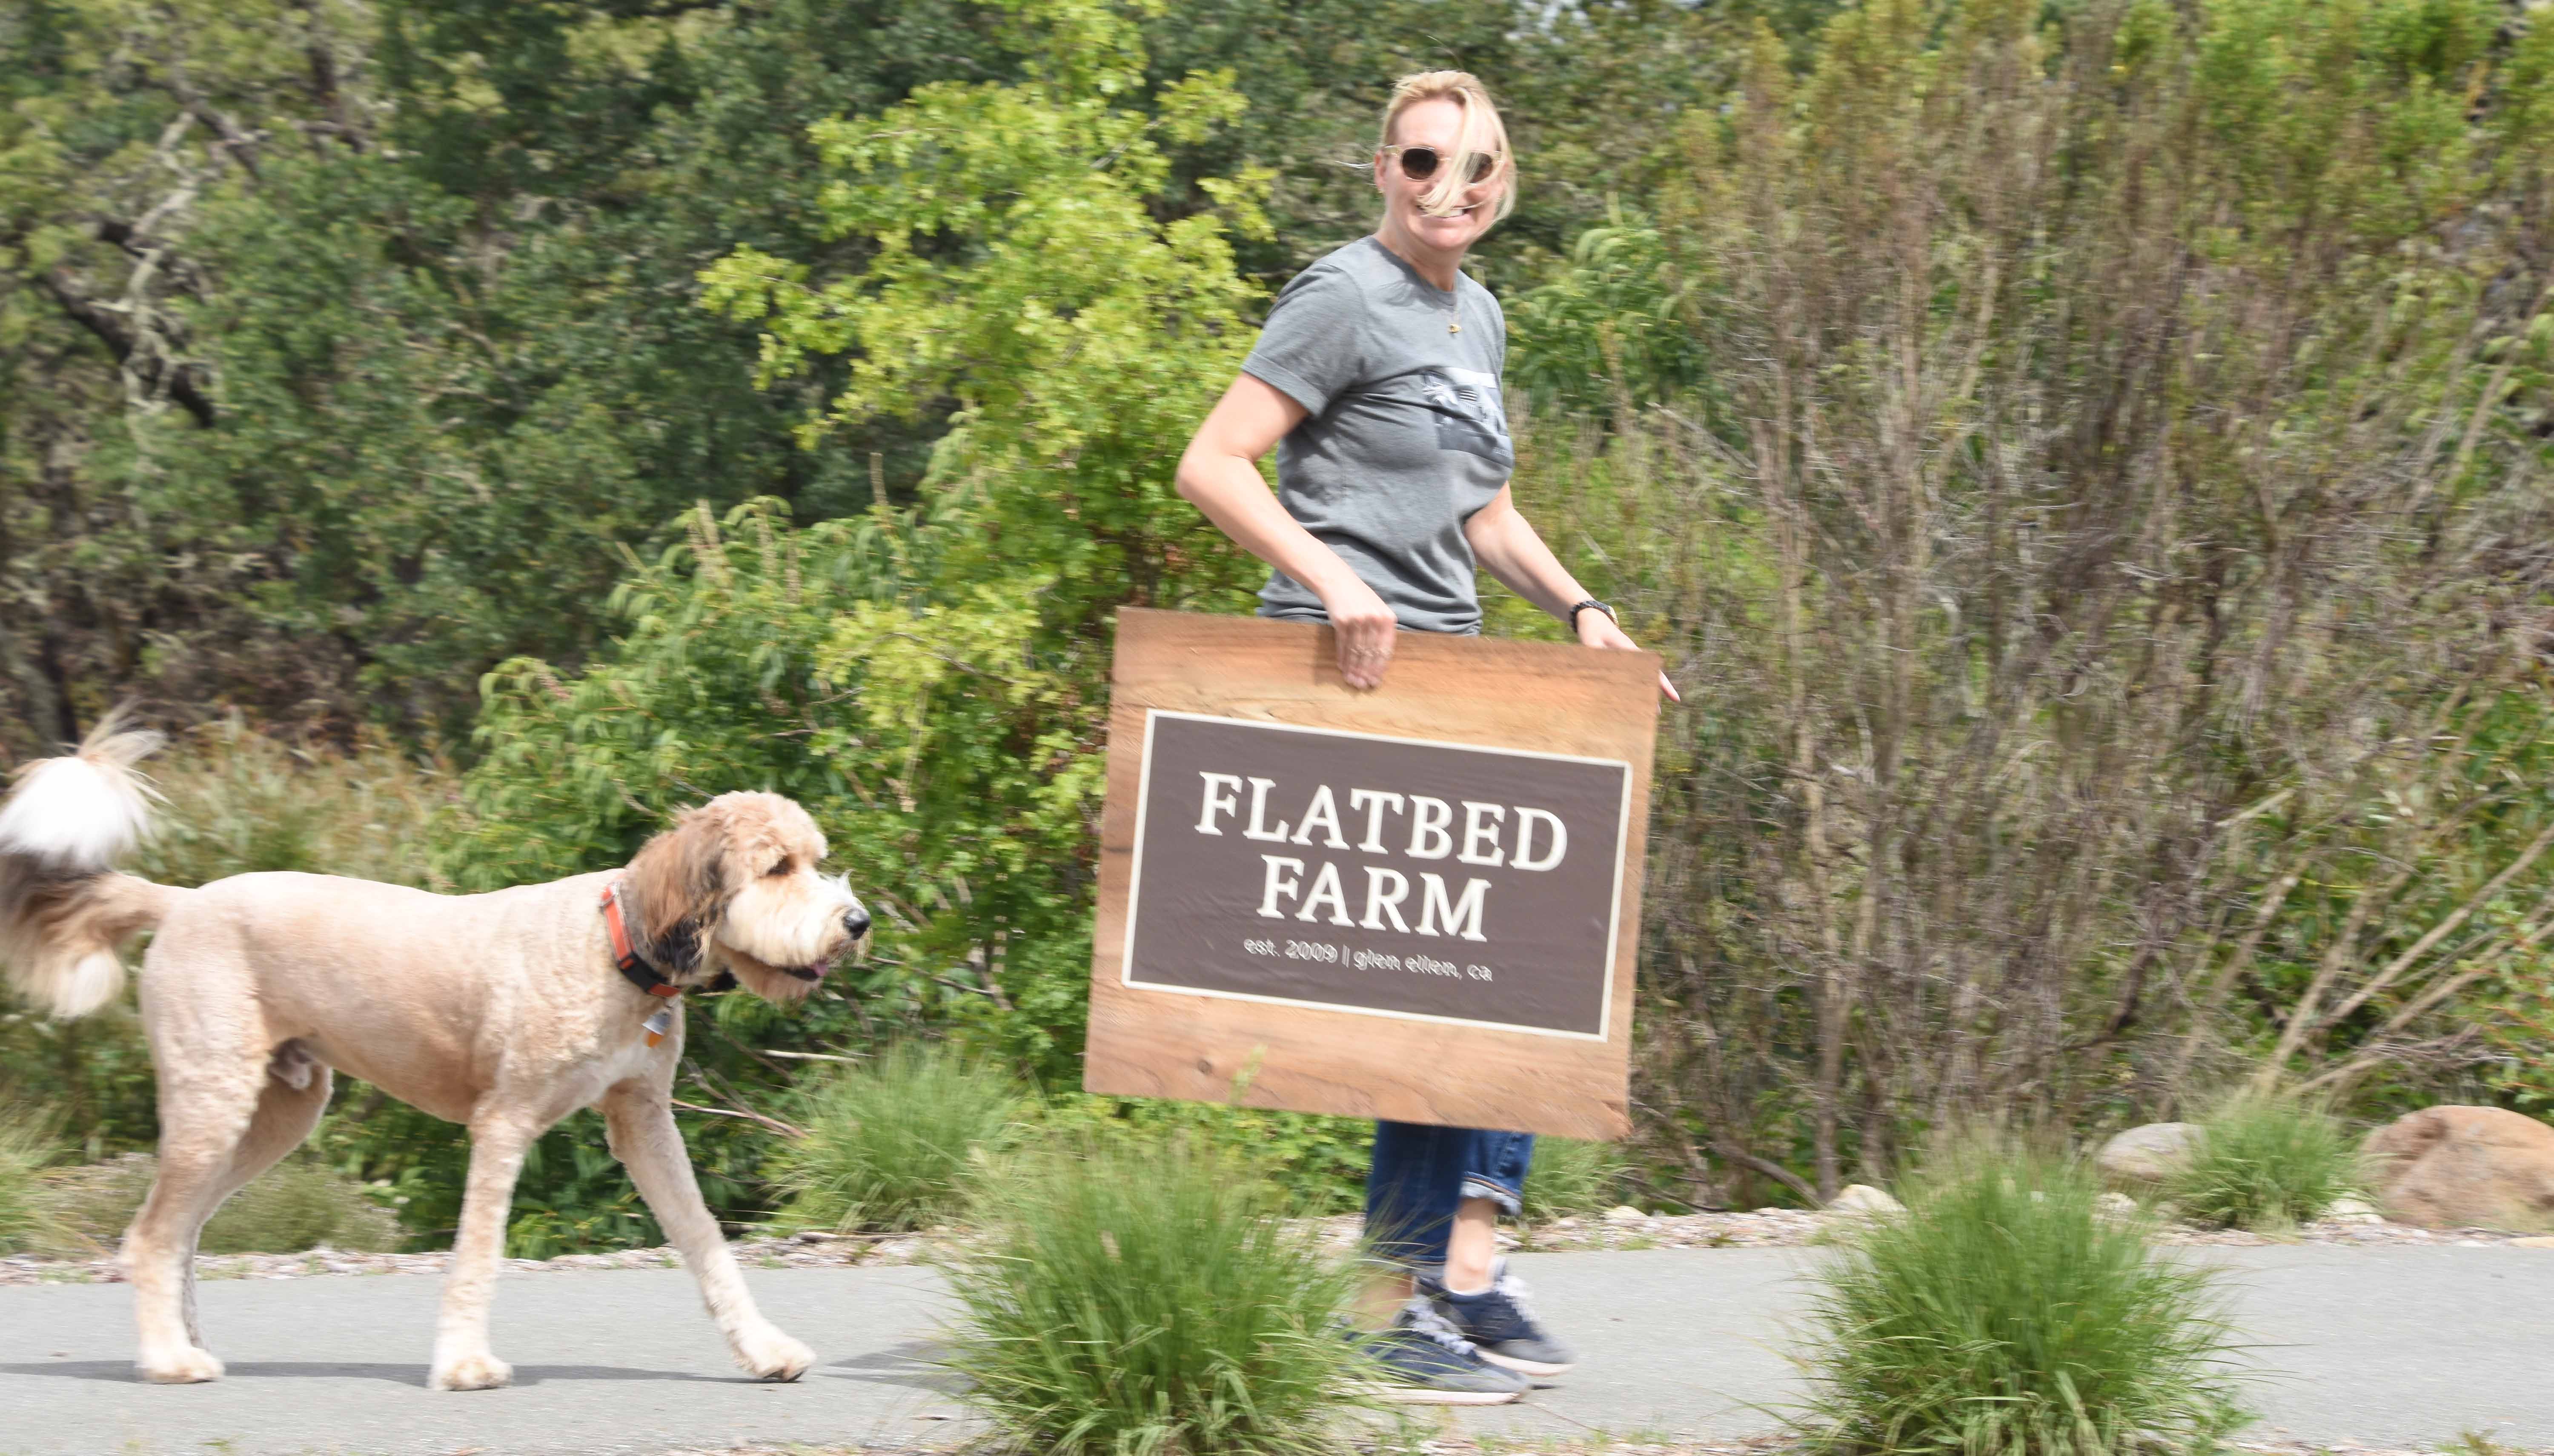 Flatbed Farm Bounces Back After Fires with Sofie Dolan opening the farm stand for business